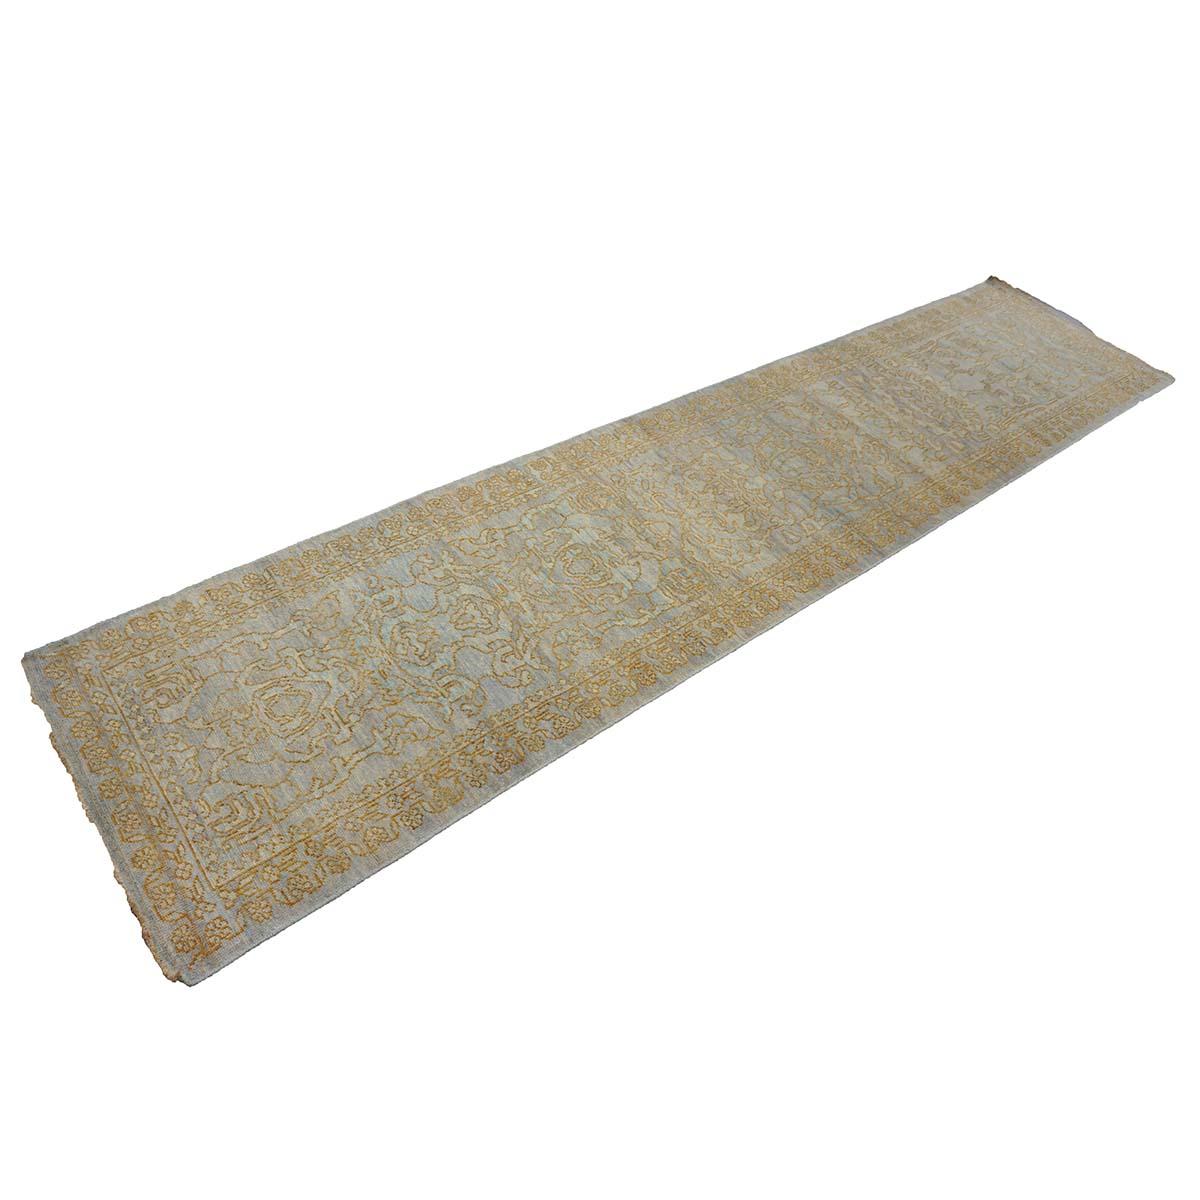 Contemporary 21st Century Sultanabad Master 3x12 Light Slate & Gold Hallway Runner Rug For Sale